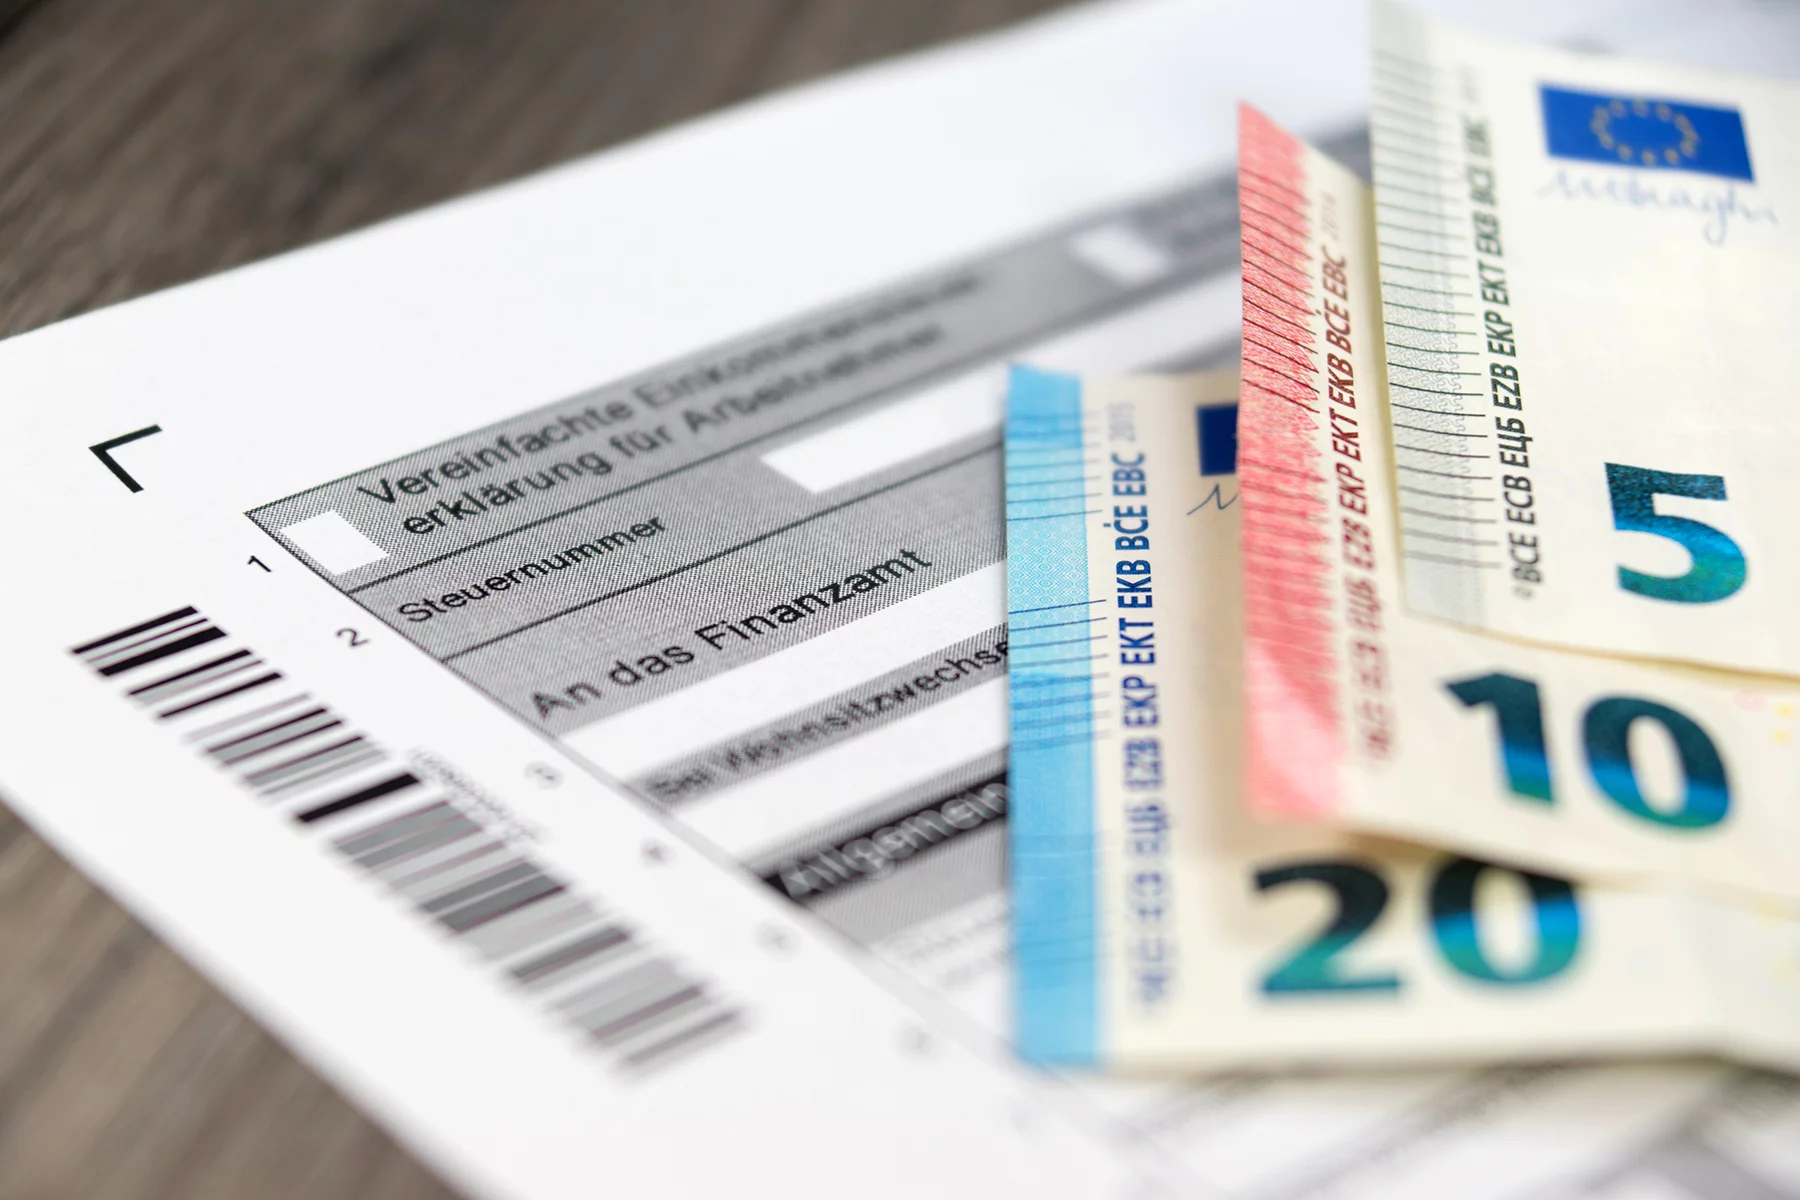 German income tax refund form with Euro notes laid on top